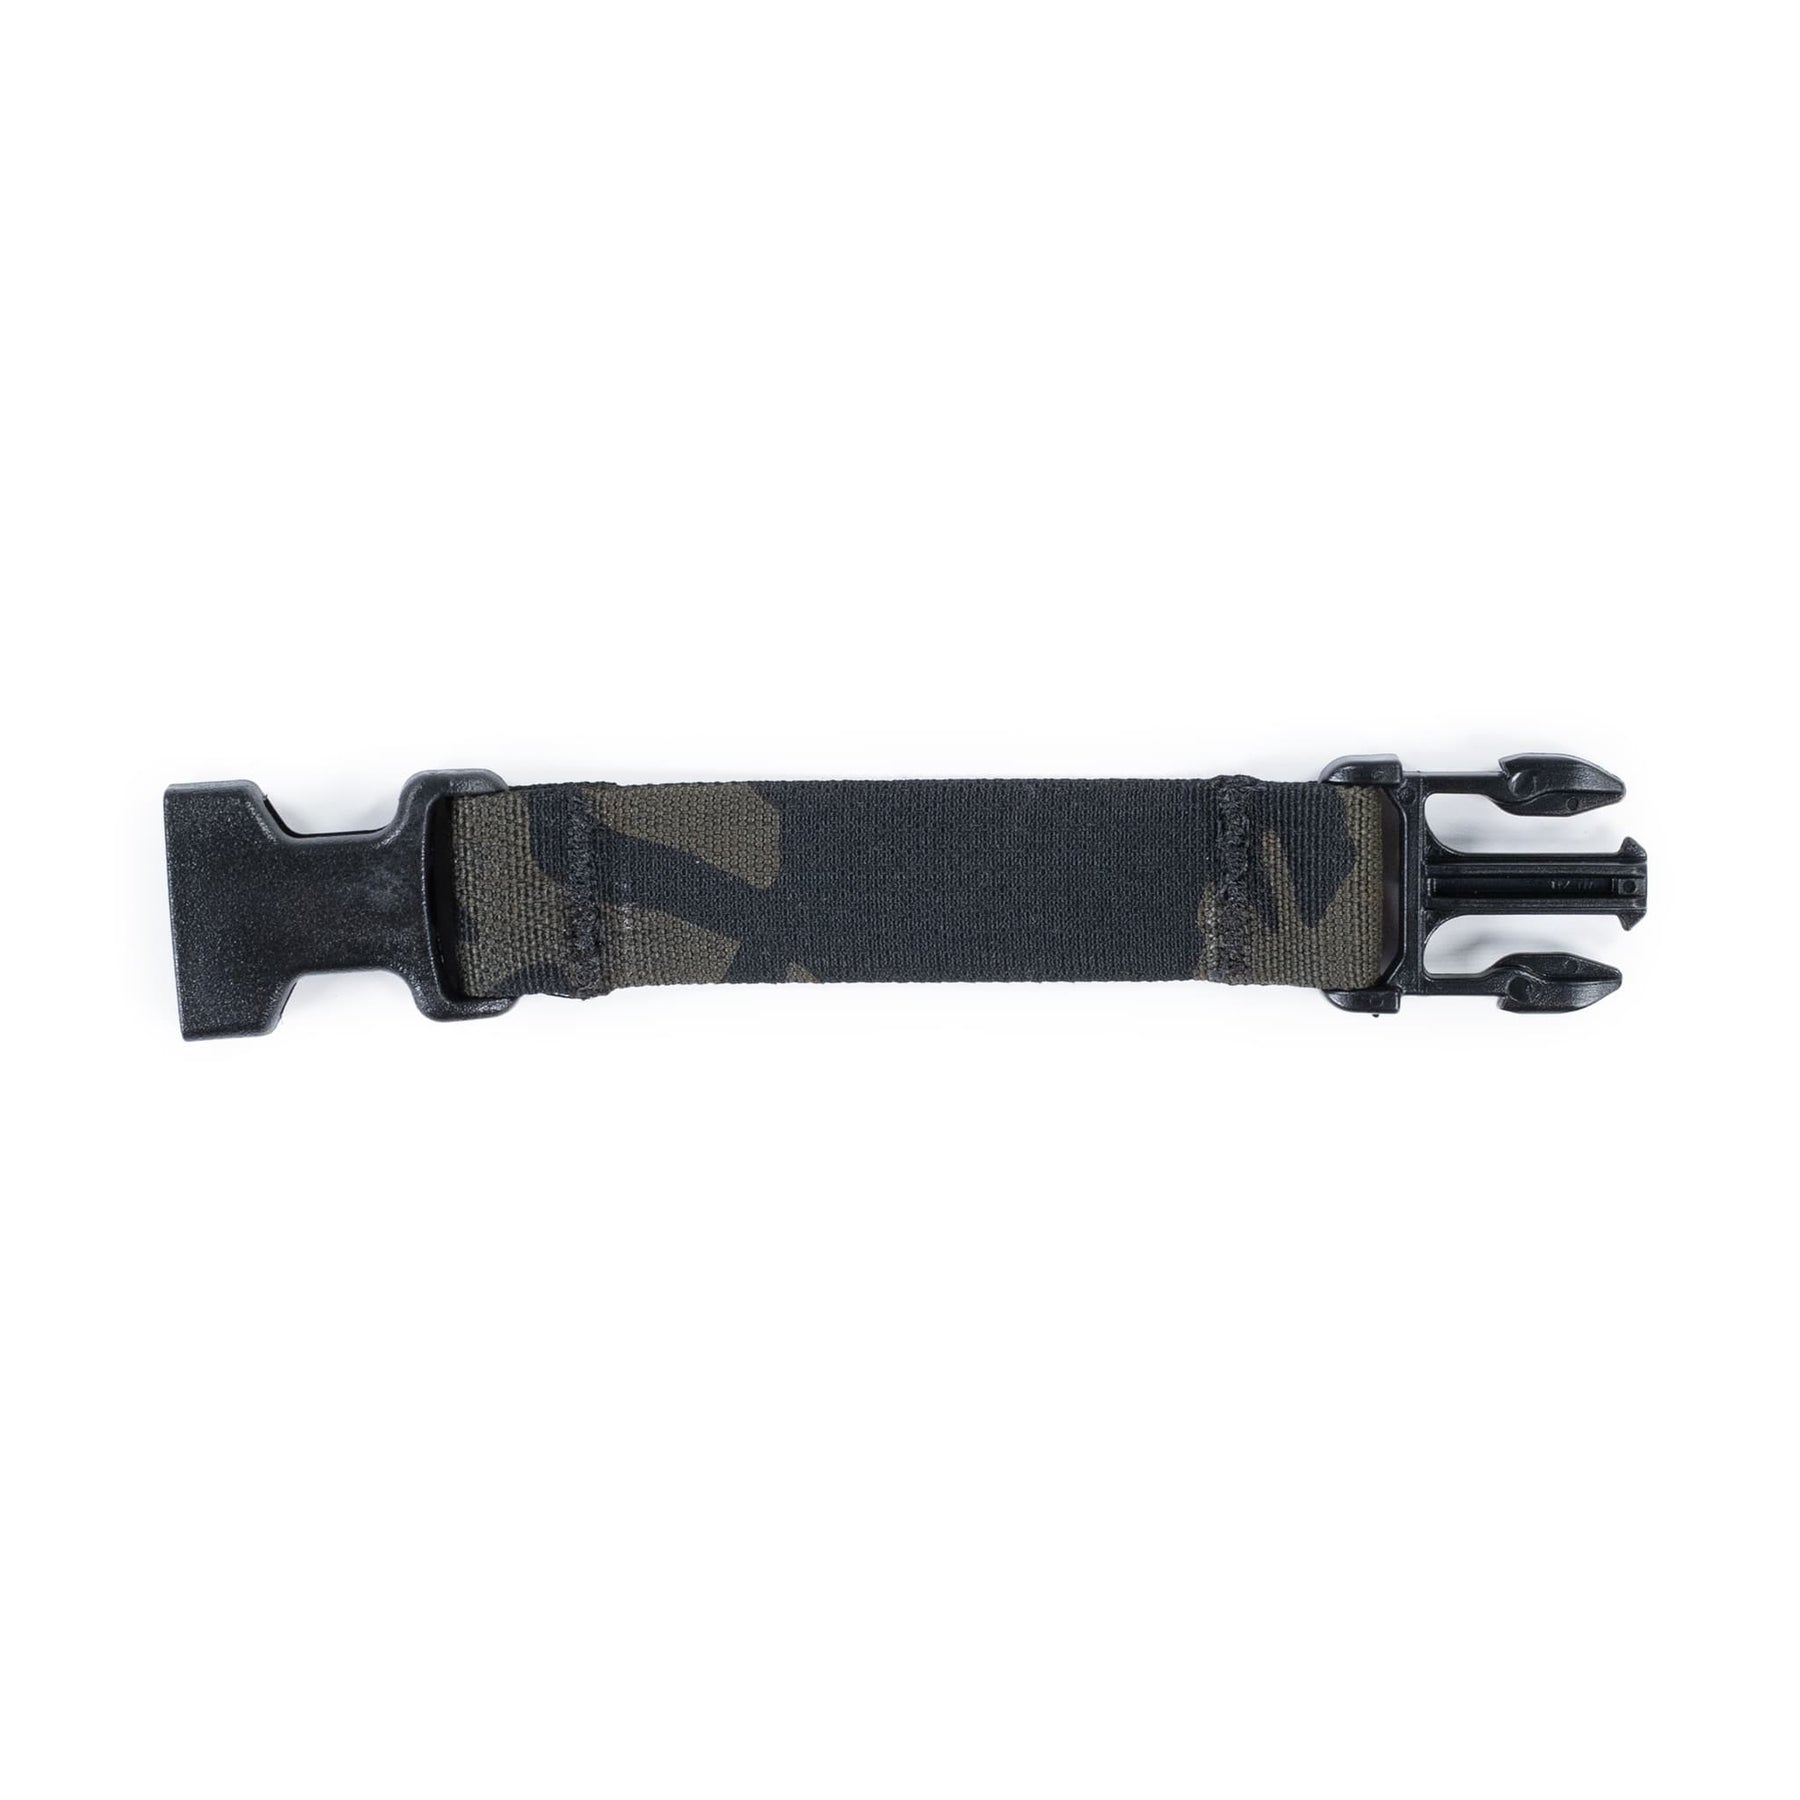 ISO an extender strap that fits an Adidas fanny pack strap (see pics